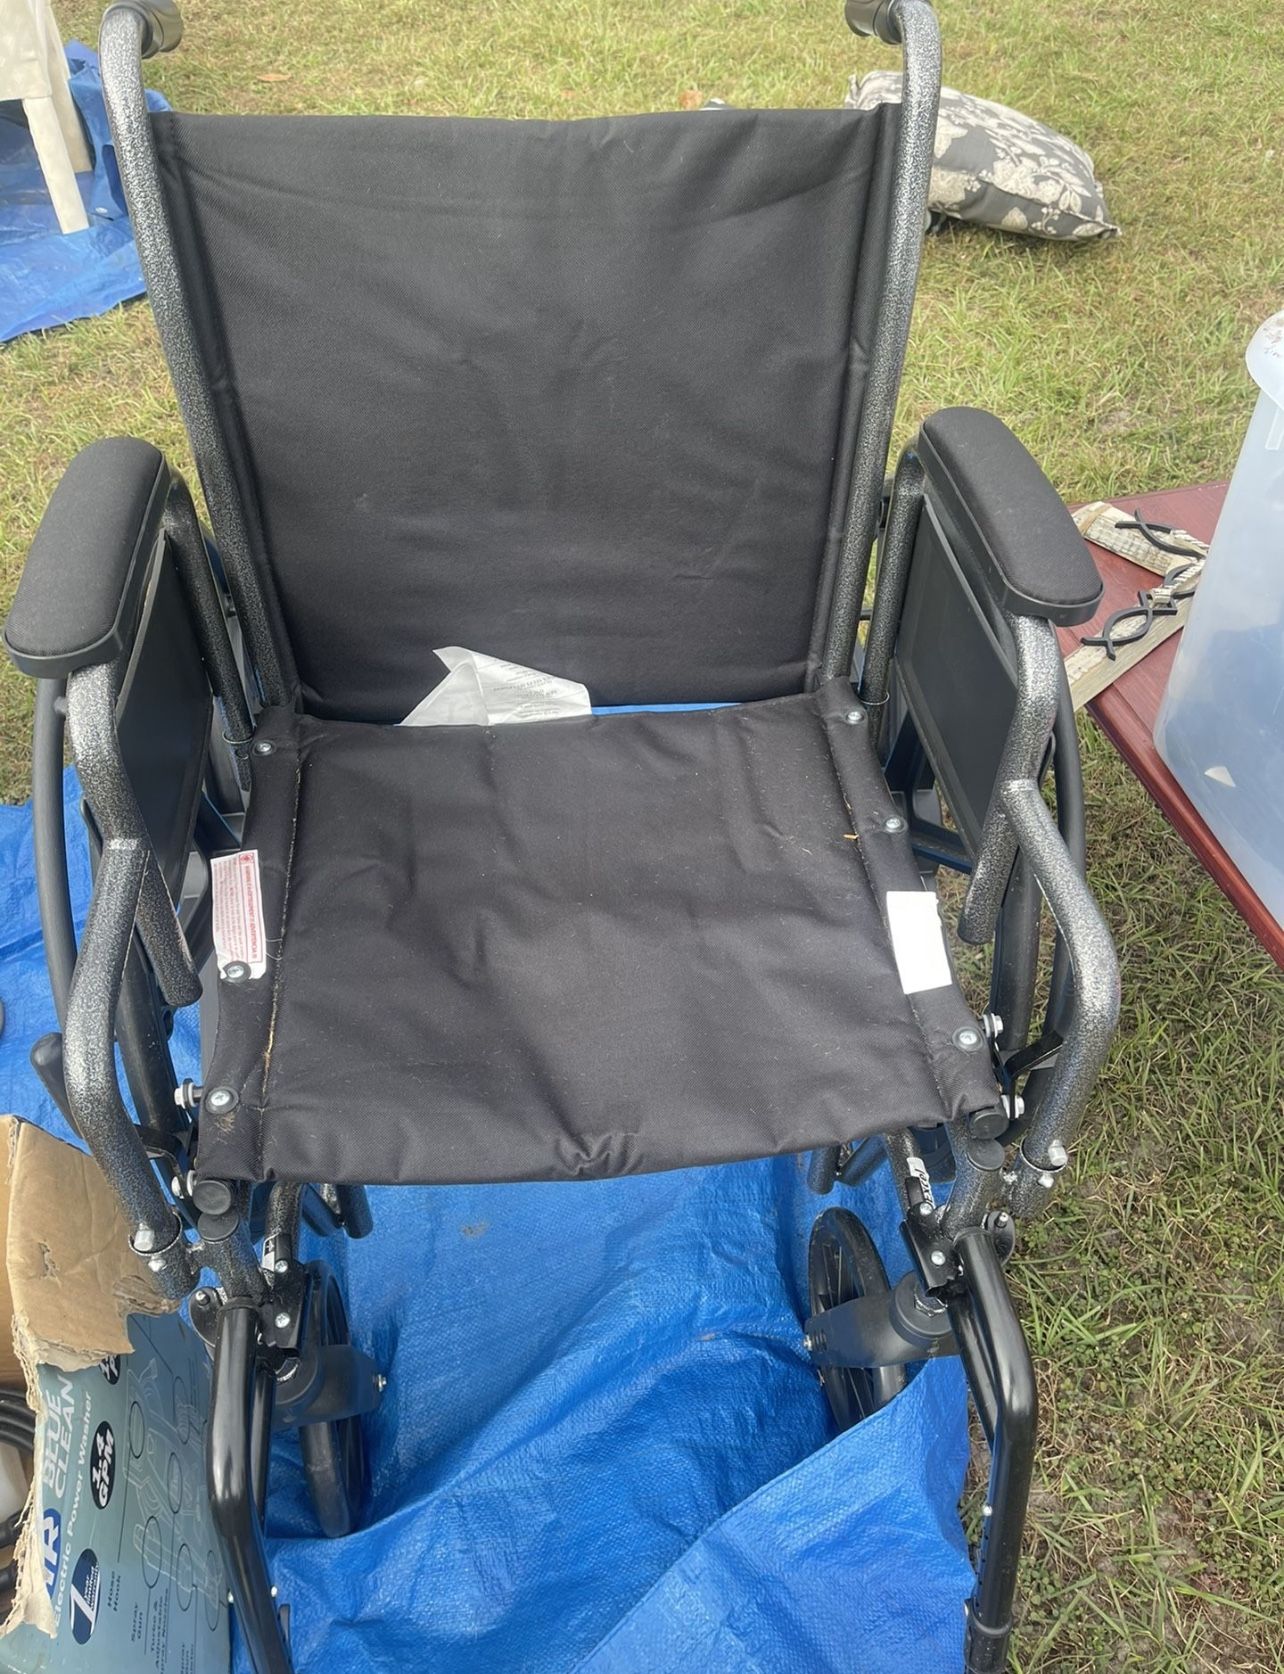 New Wheel Chair Only Used Once, Originally $100